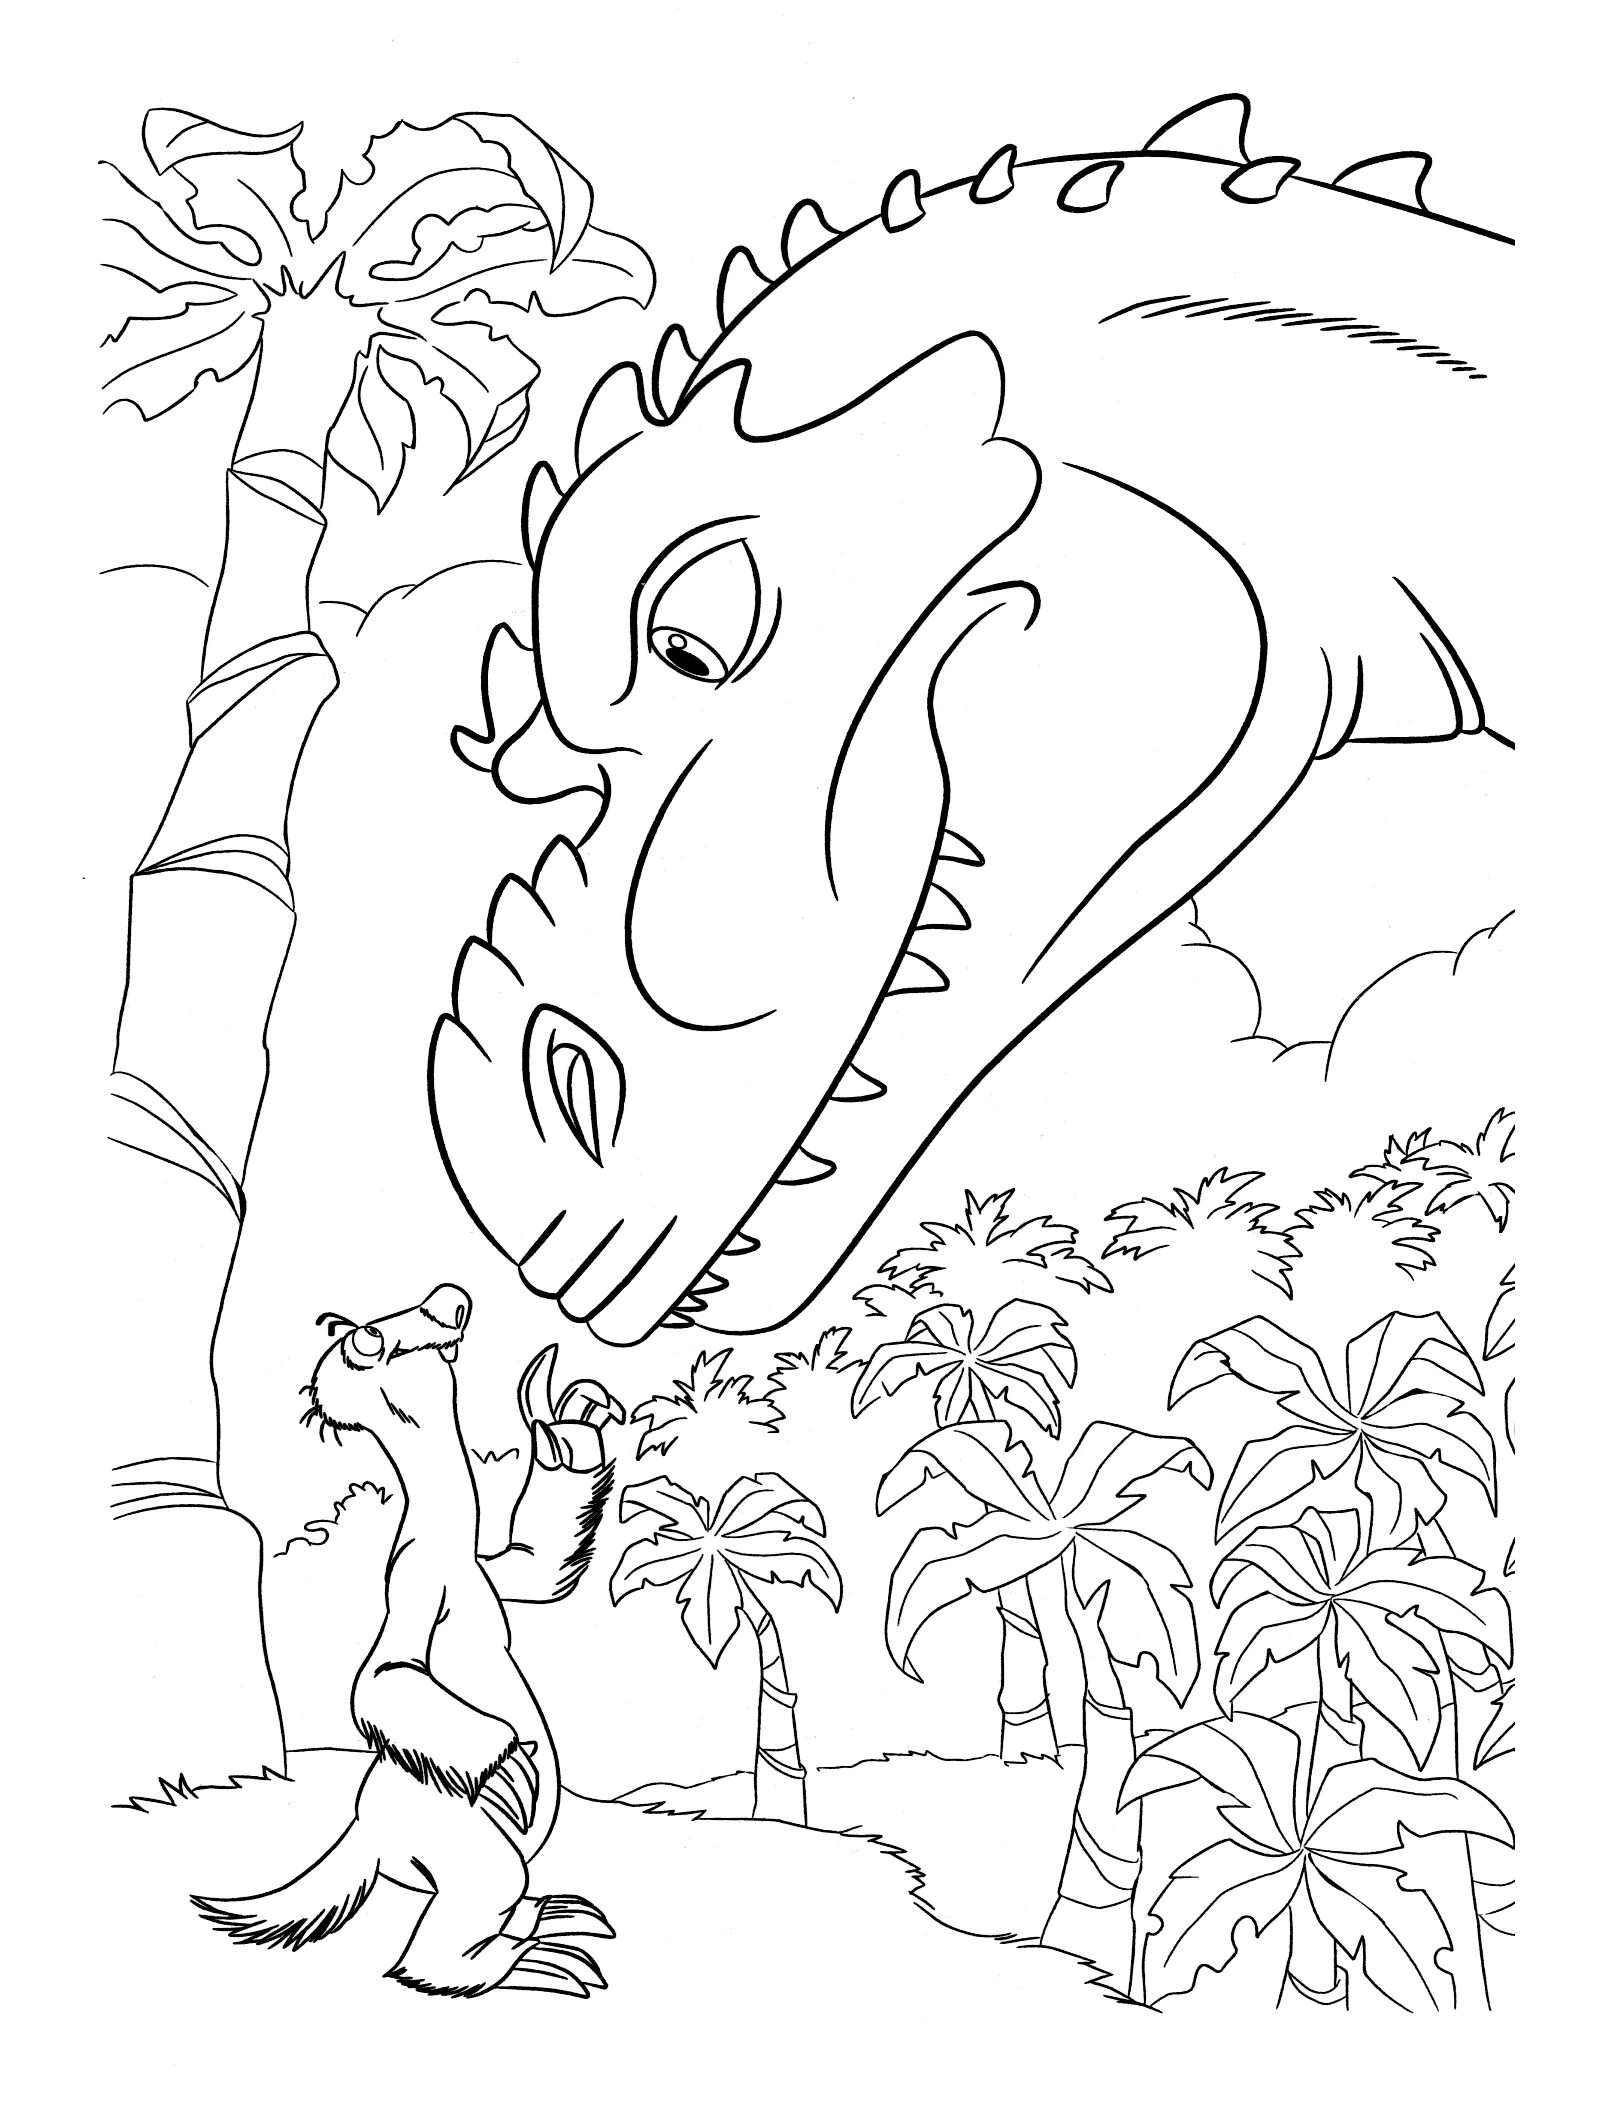 Mysterious coloring book ice age 3 age of dinosaurs